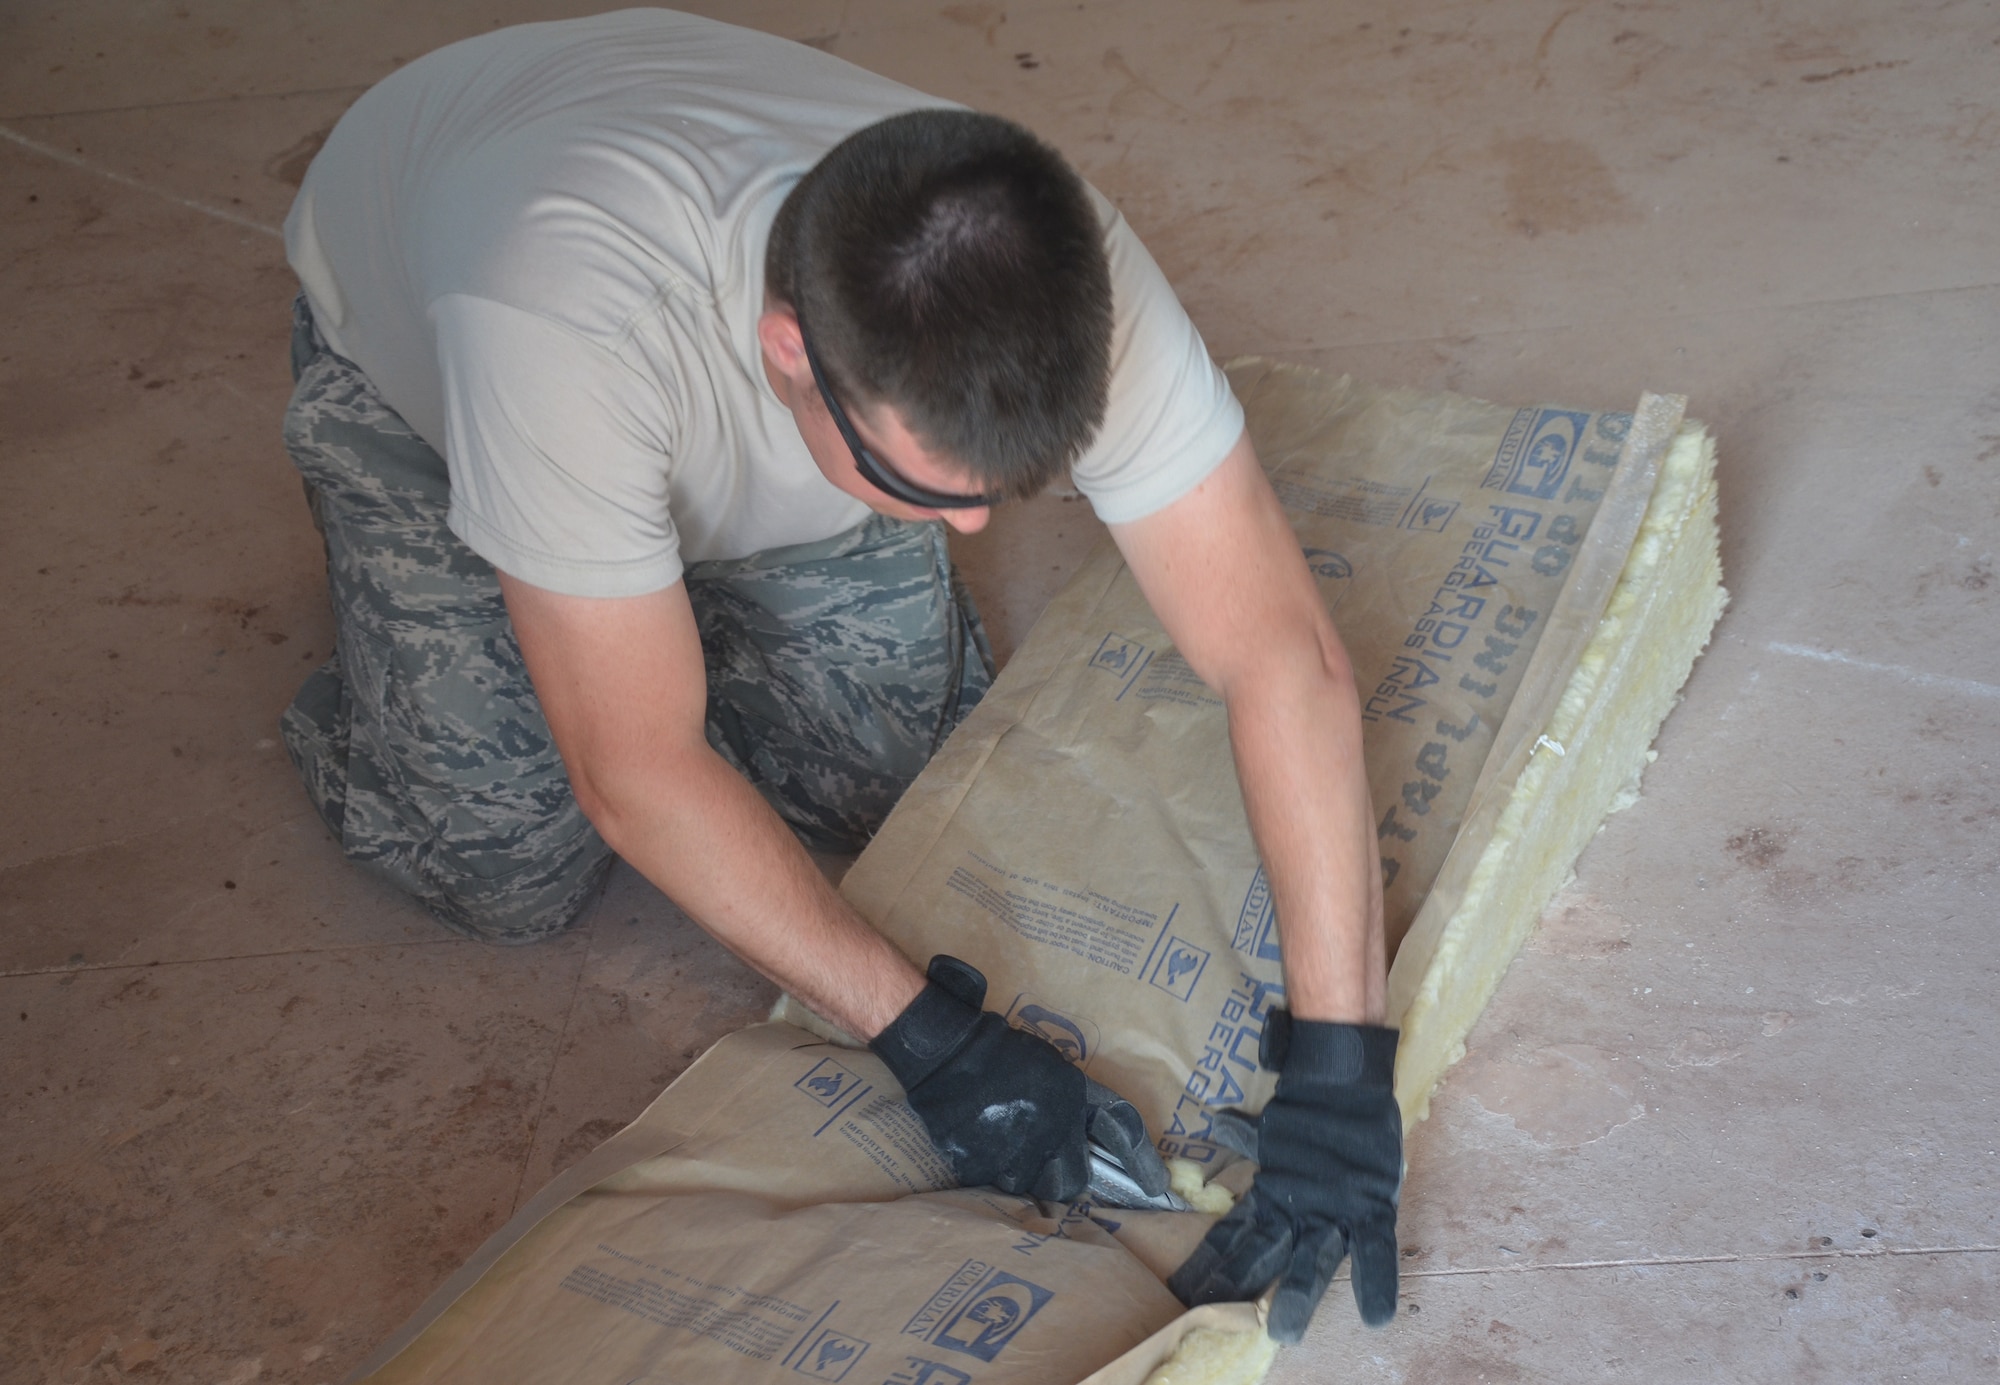 U.S. Air Force Staff Sgt. Brian O’Shea, 131st Civil Engineer Squadron structural technician, cuts insulation for a “hogan,” or Navajo building, at St. Michaels Academy in Window Rock, Ariz., Aug. 8, 2013. This project helped ensure handicap children were able to live in a comfortable home with modern amenities. (U.S. Air Force photo/Released)